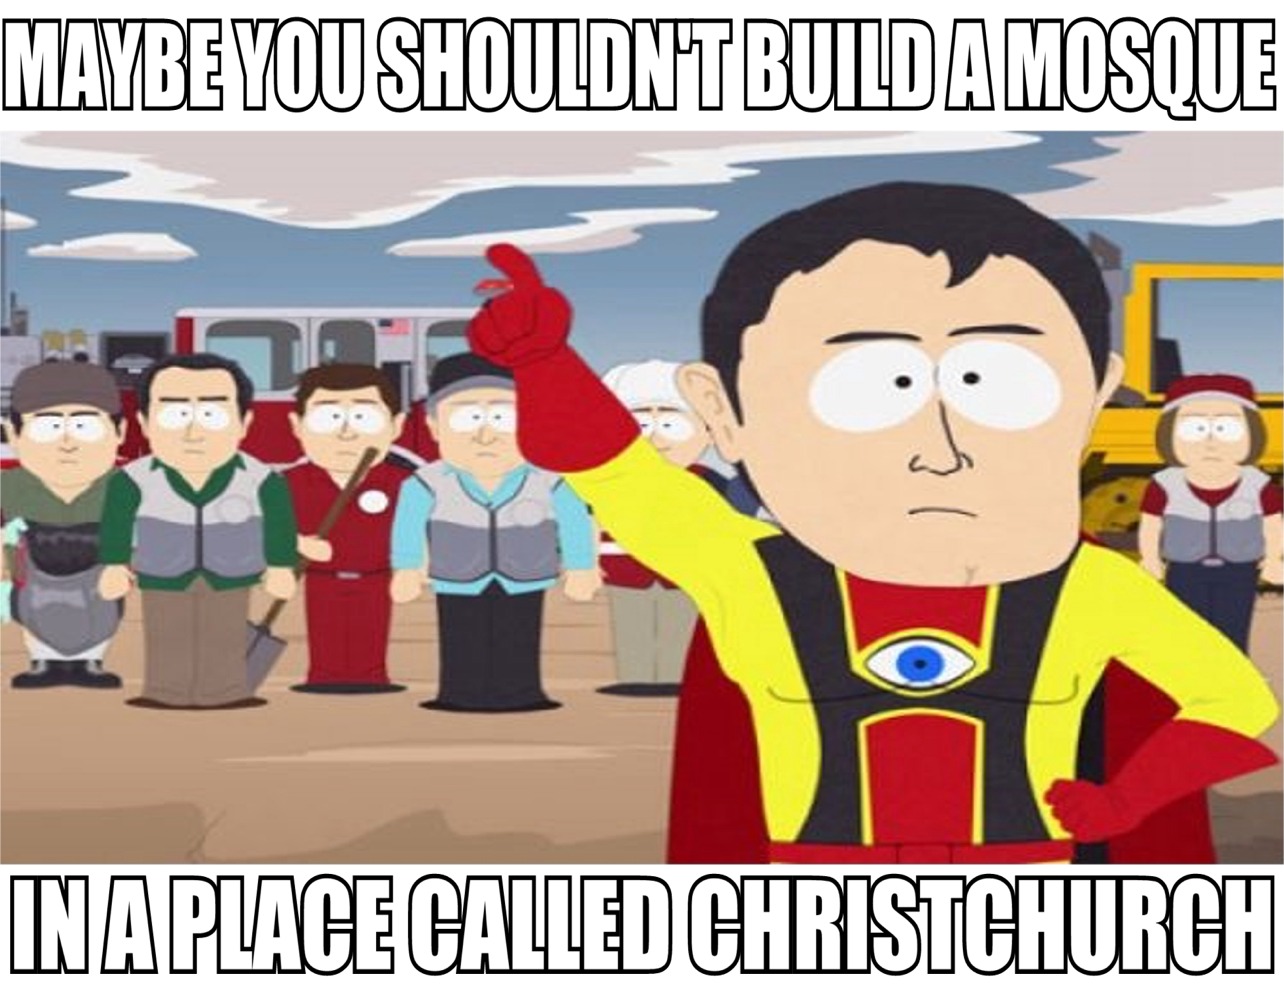 captain hindsight - Maybe You Shouldntbuild Amosque Inaplace Called Christchurch